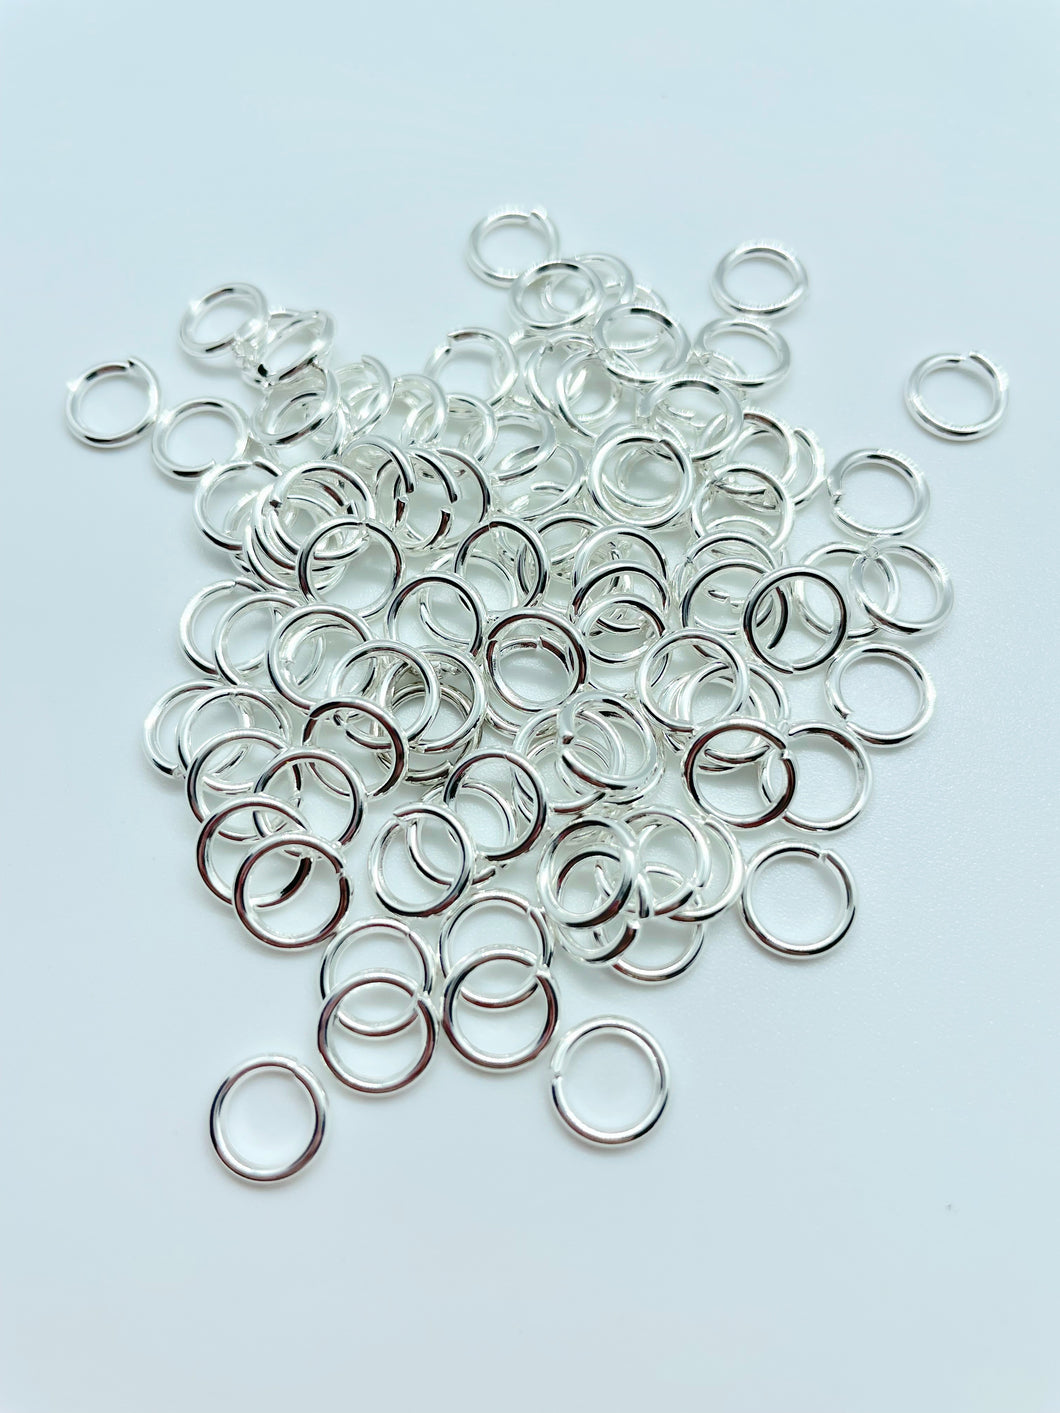 8mm Bright Silver Jump Rings